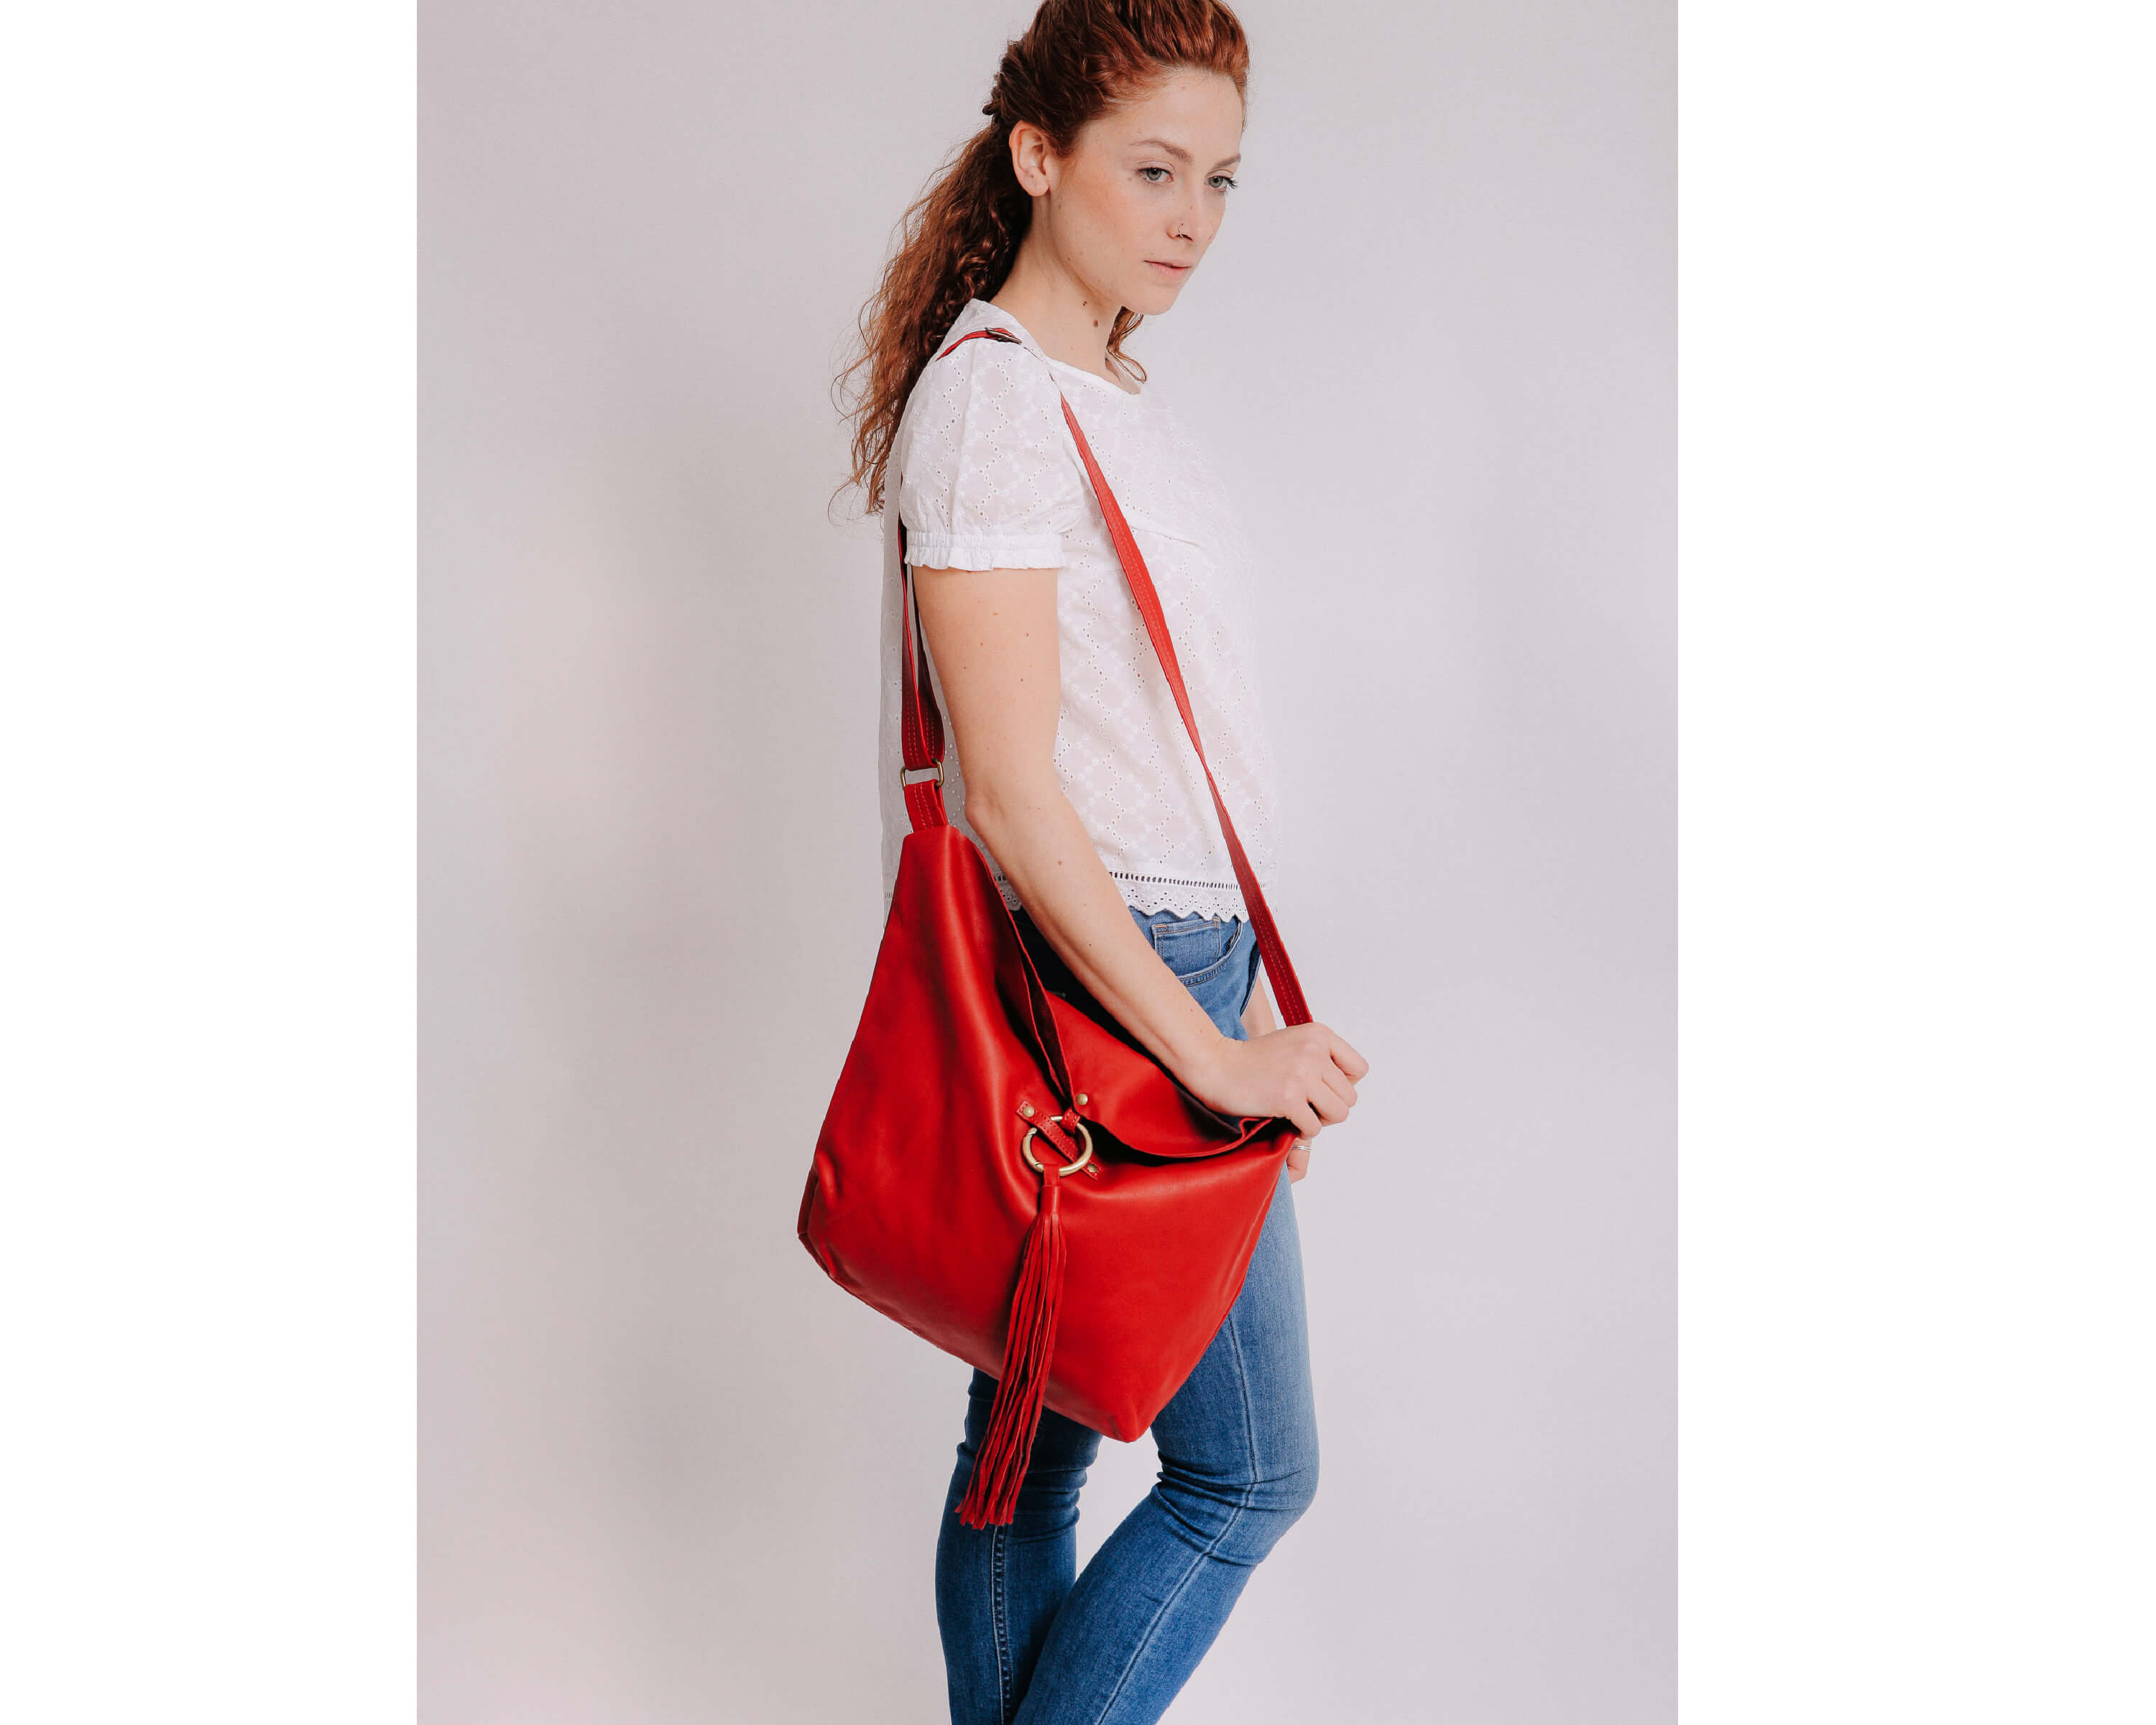 Hobo Crossbody Bag, Leather Purse | Mayko Bags Red / No Lining